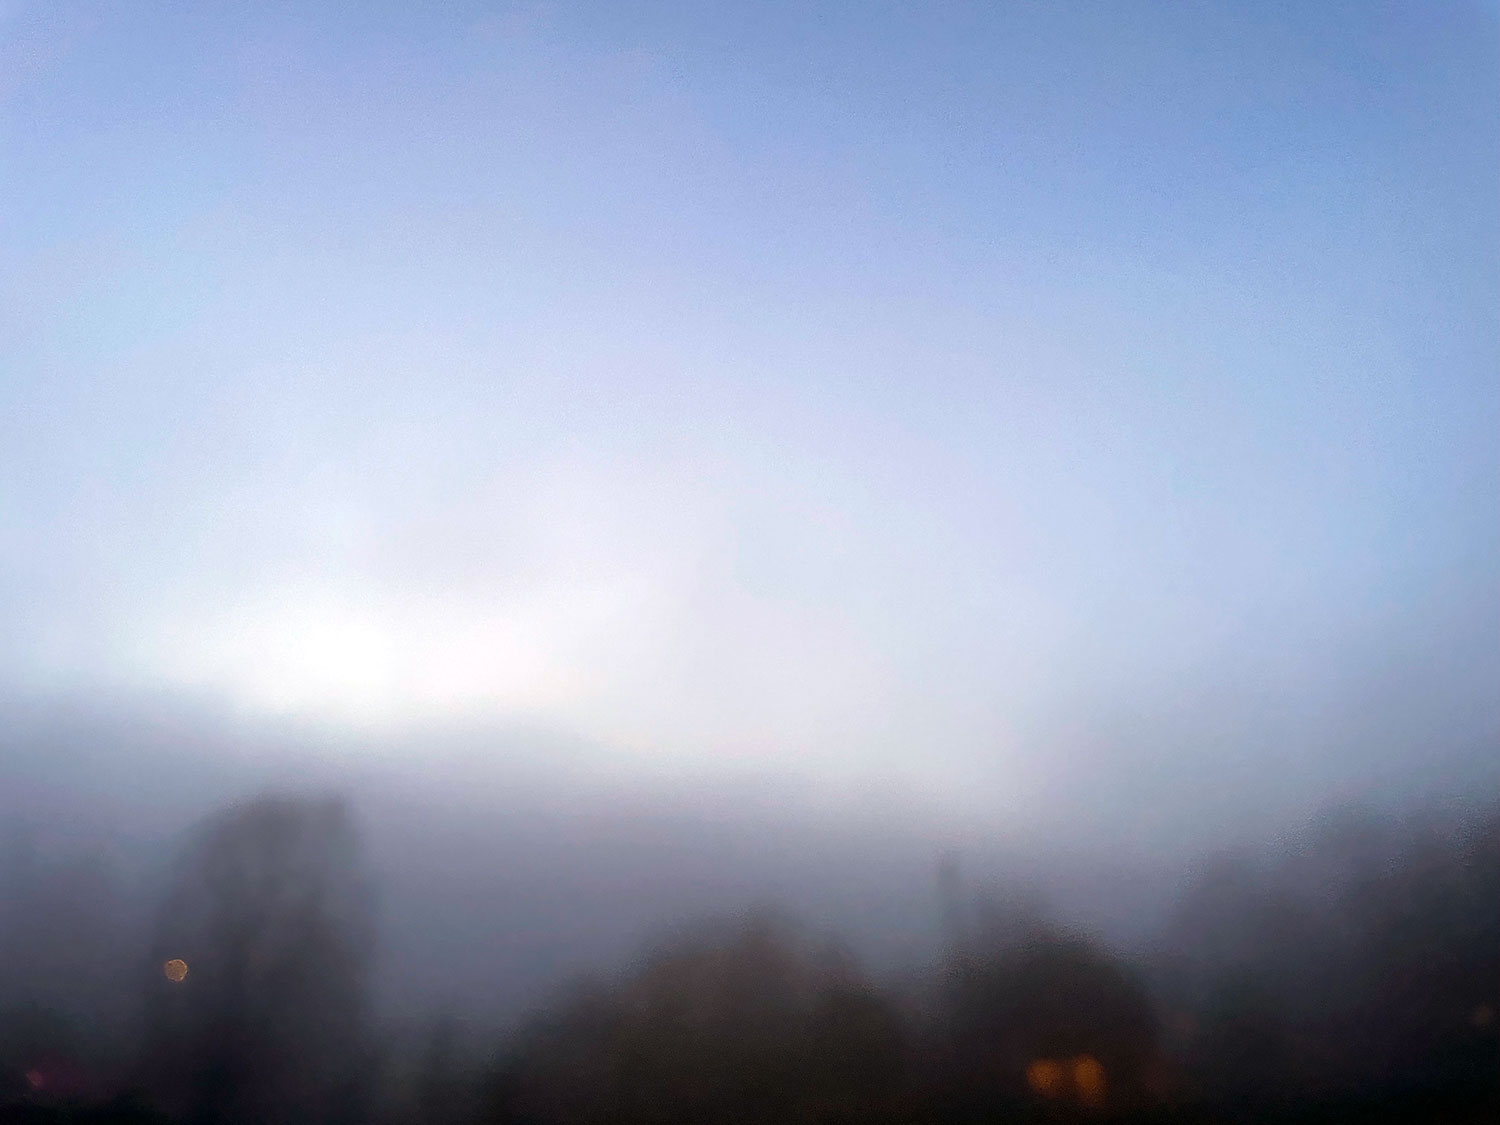 A periwinkle spring sky softened by a morning mist, dark shadows of trees and buildings a blur